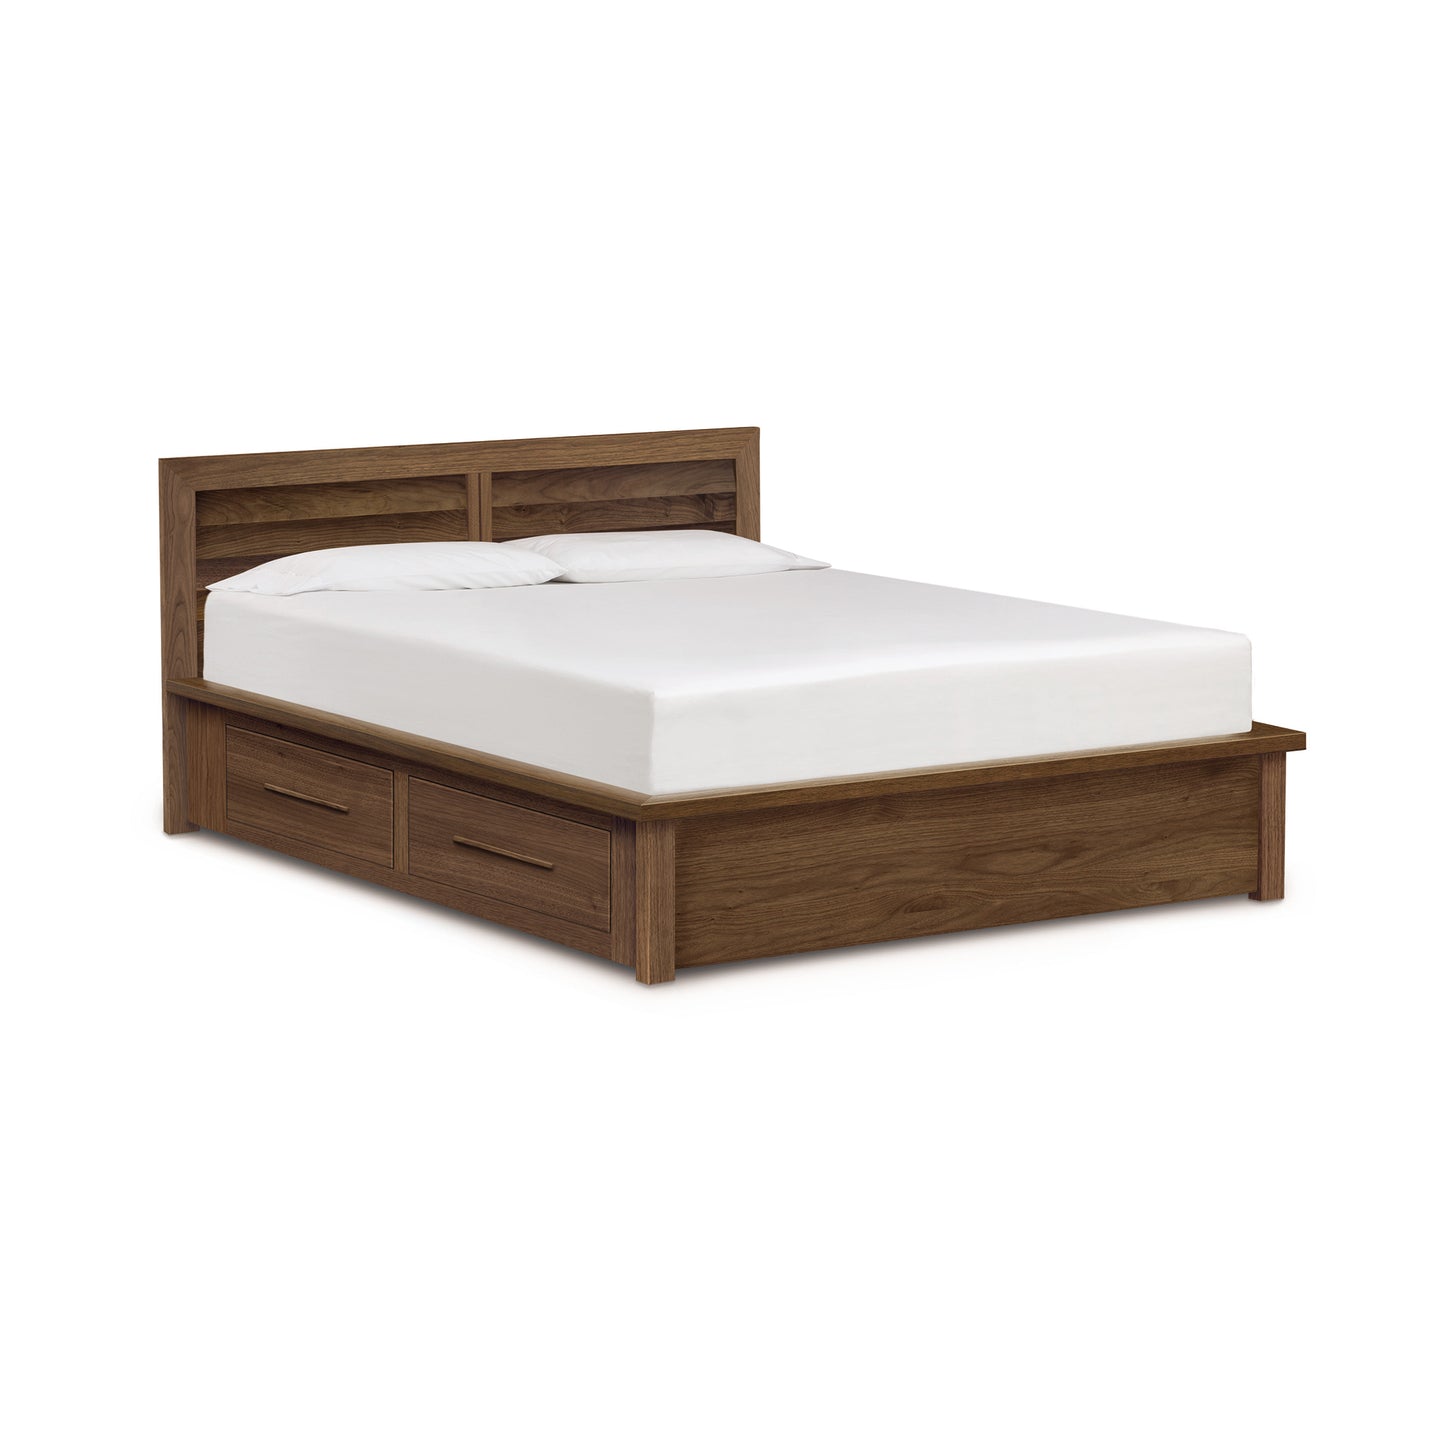 The Copeland Furniture Moduluxe Storage Bed with Clapboard Headboard - 35" Series is a wooden bed with drawers and a white sheet. It is part of the Moduluxe Bedroom Furniture Collection, featuring a Clapboard Headboard design.